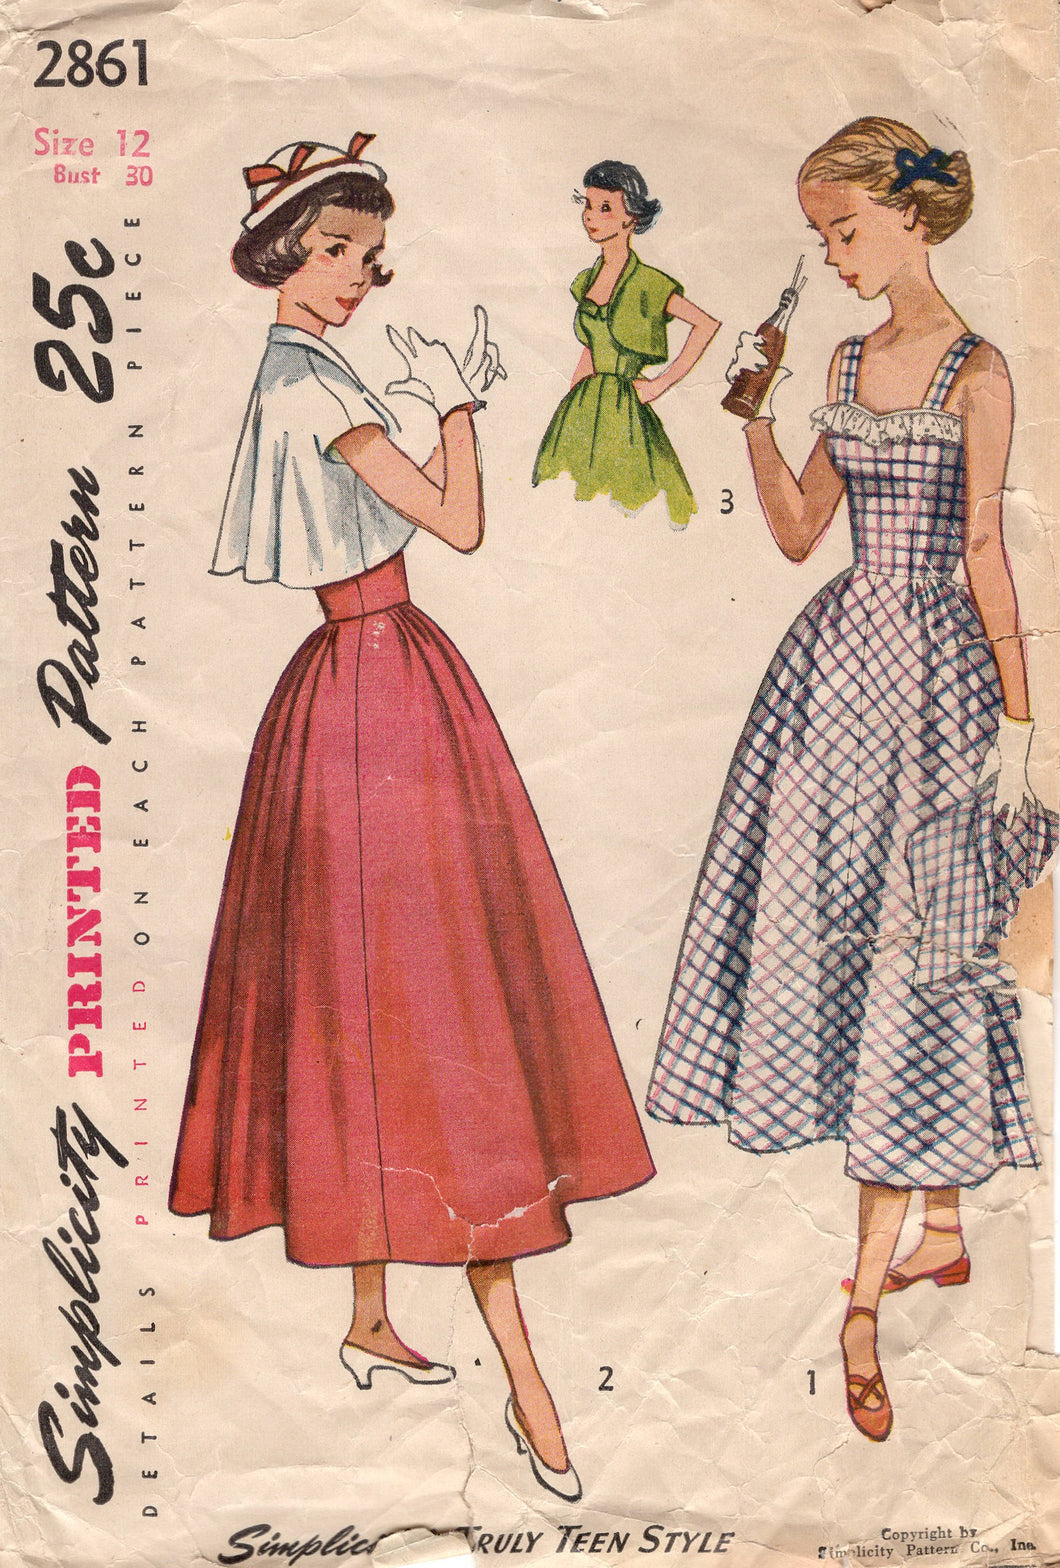 1940's Simplicity Sundress with Thin Straps and Bolero Pattern - Bust 30